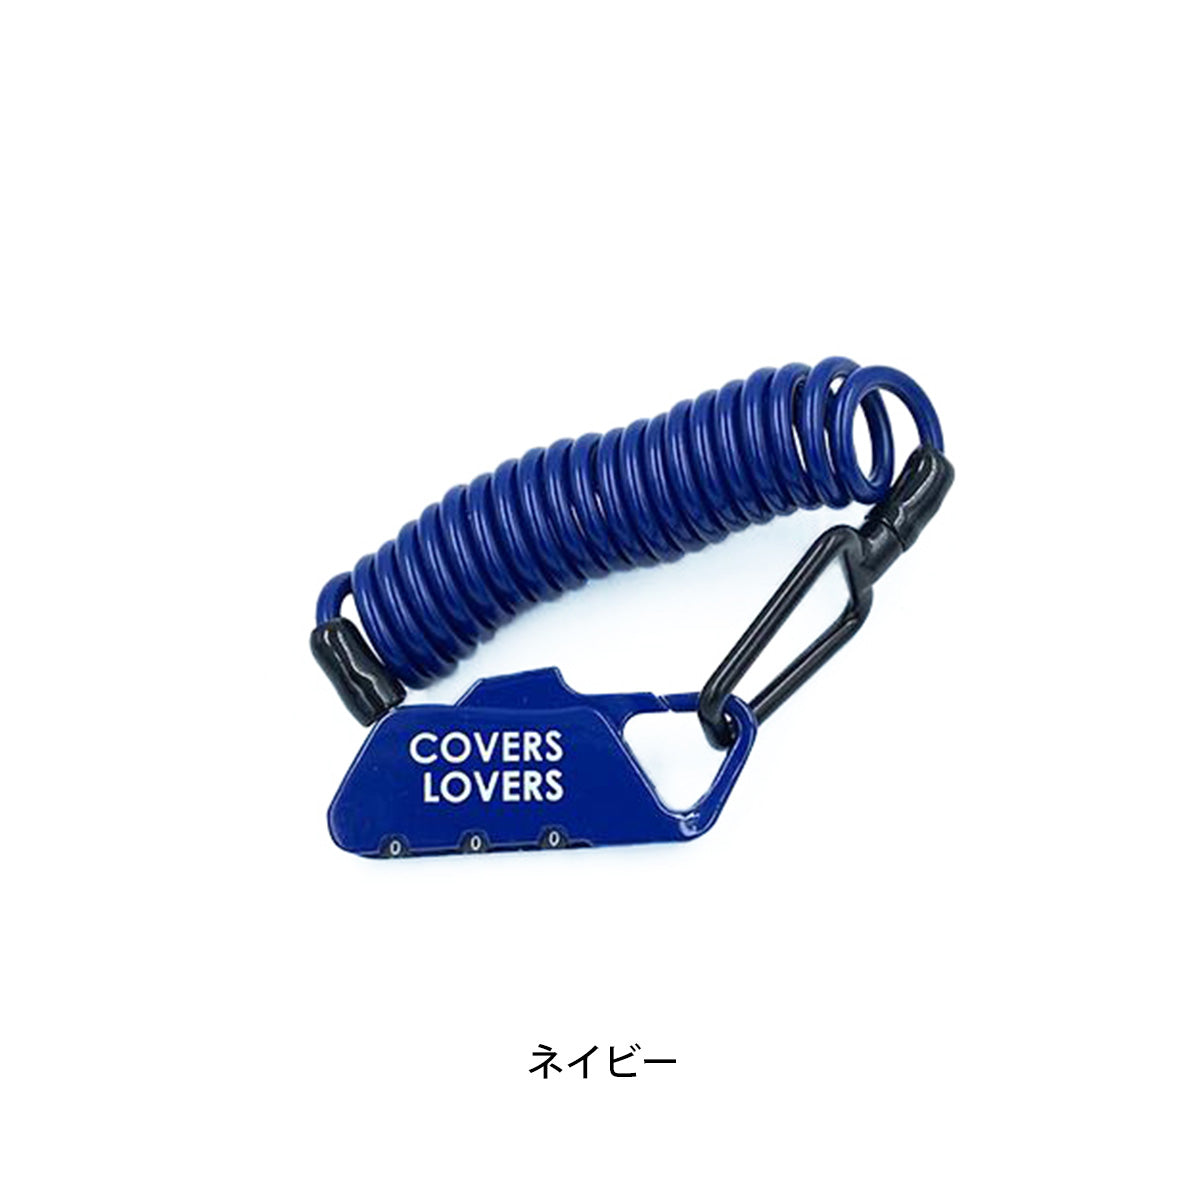 COVERS LOVERS バッテリーロック (コイルダイヤルケーブル) カギ [CL BatteryLock]